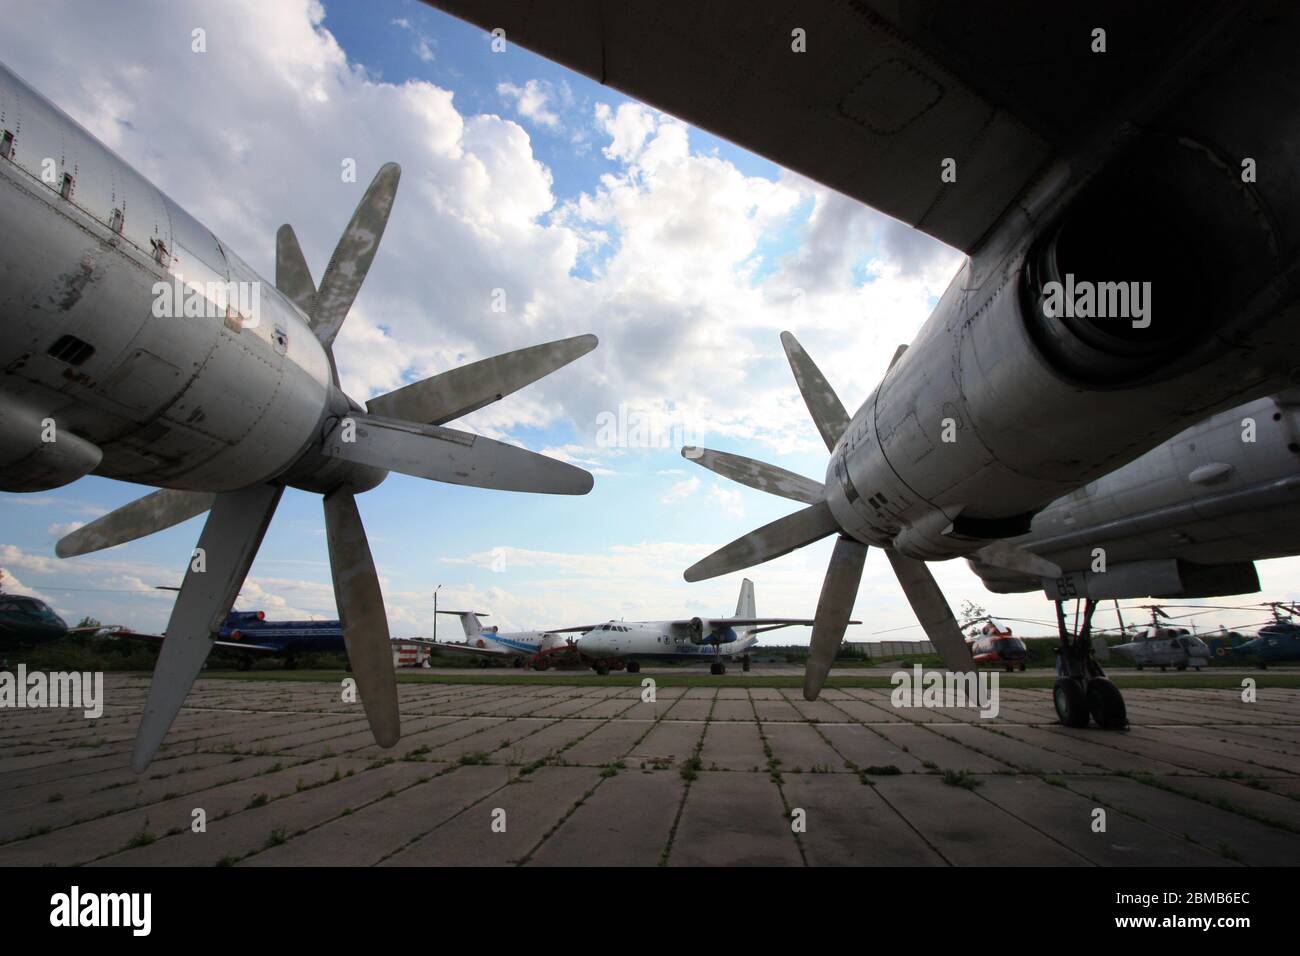 View of a Kuznetsov NK-12 turboprop engines with contra-rotating propellers mounted on a Tupolev Tu-142 'Bear', Zhulyany Ukraine State Aviation Museum Stock Photo